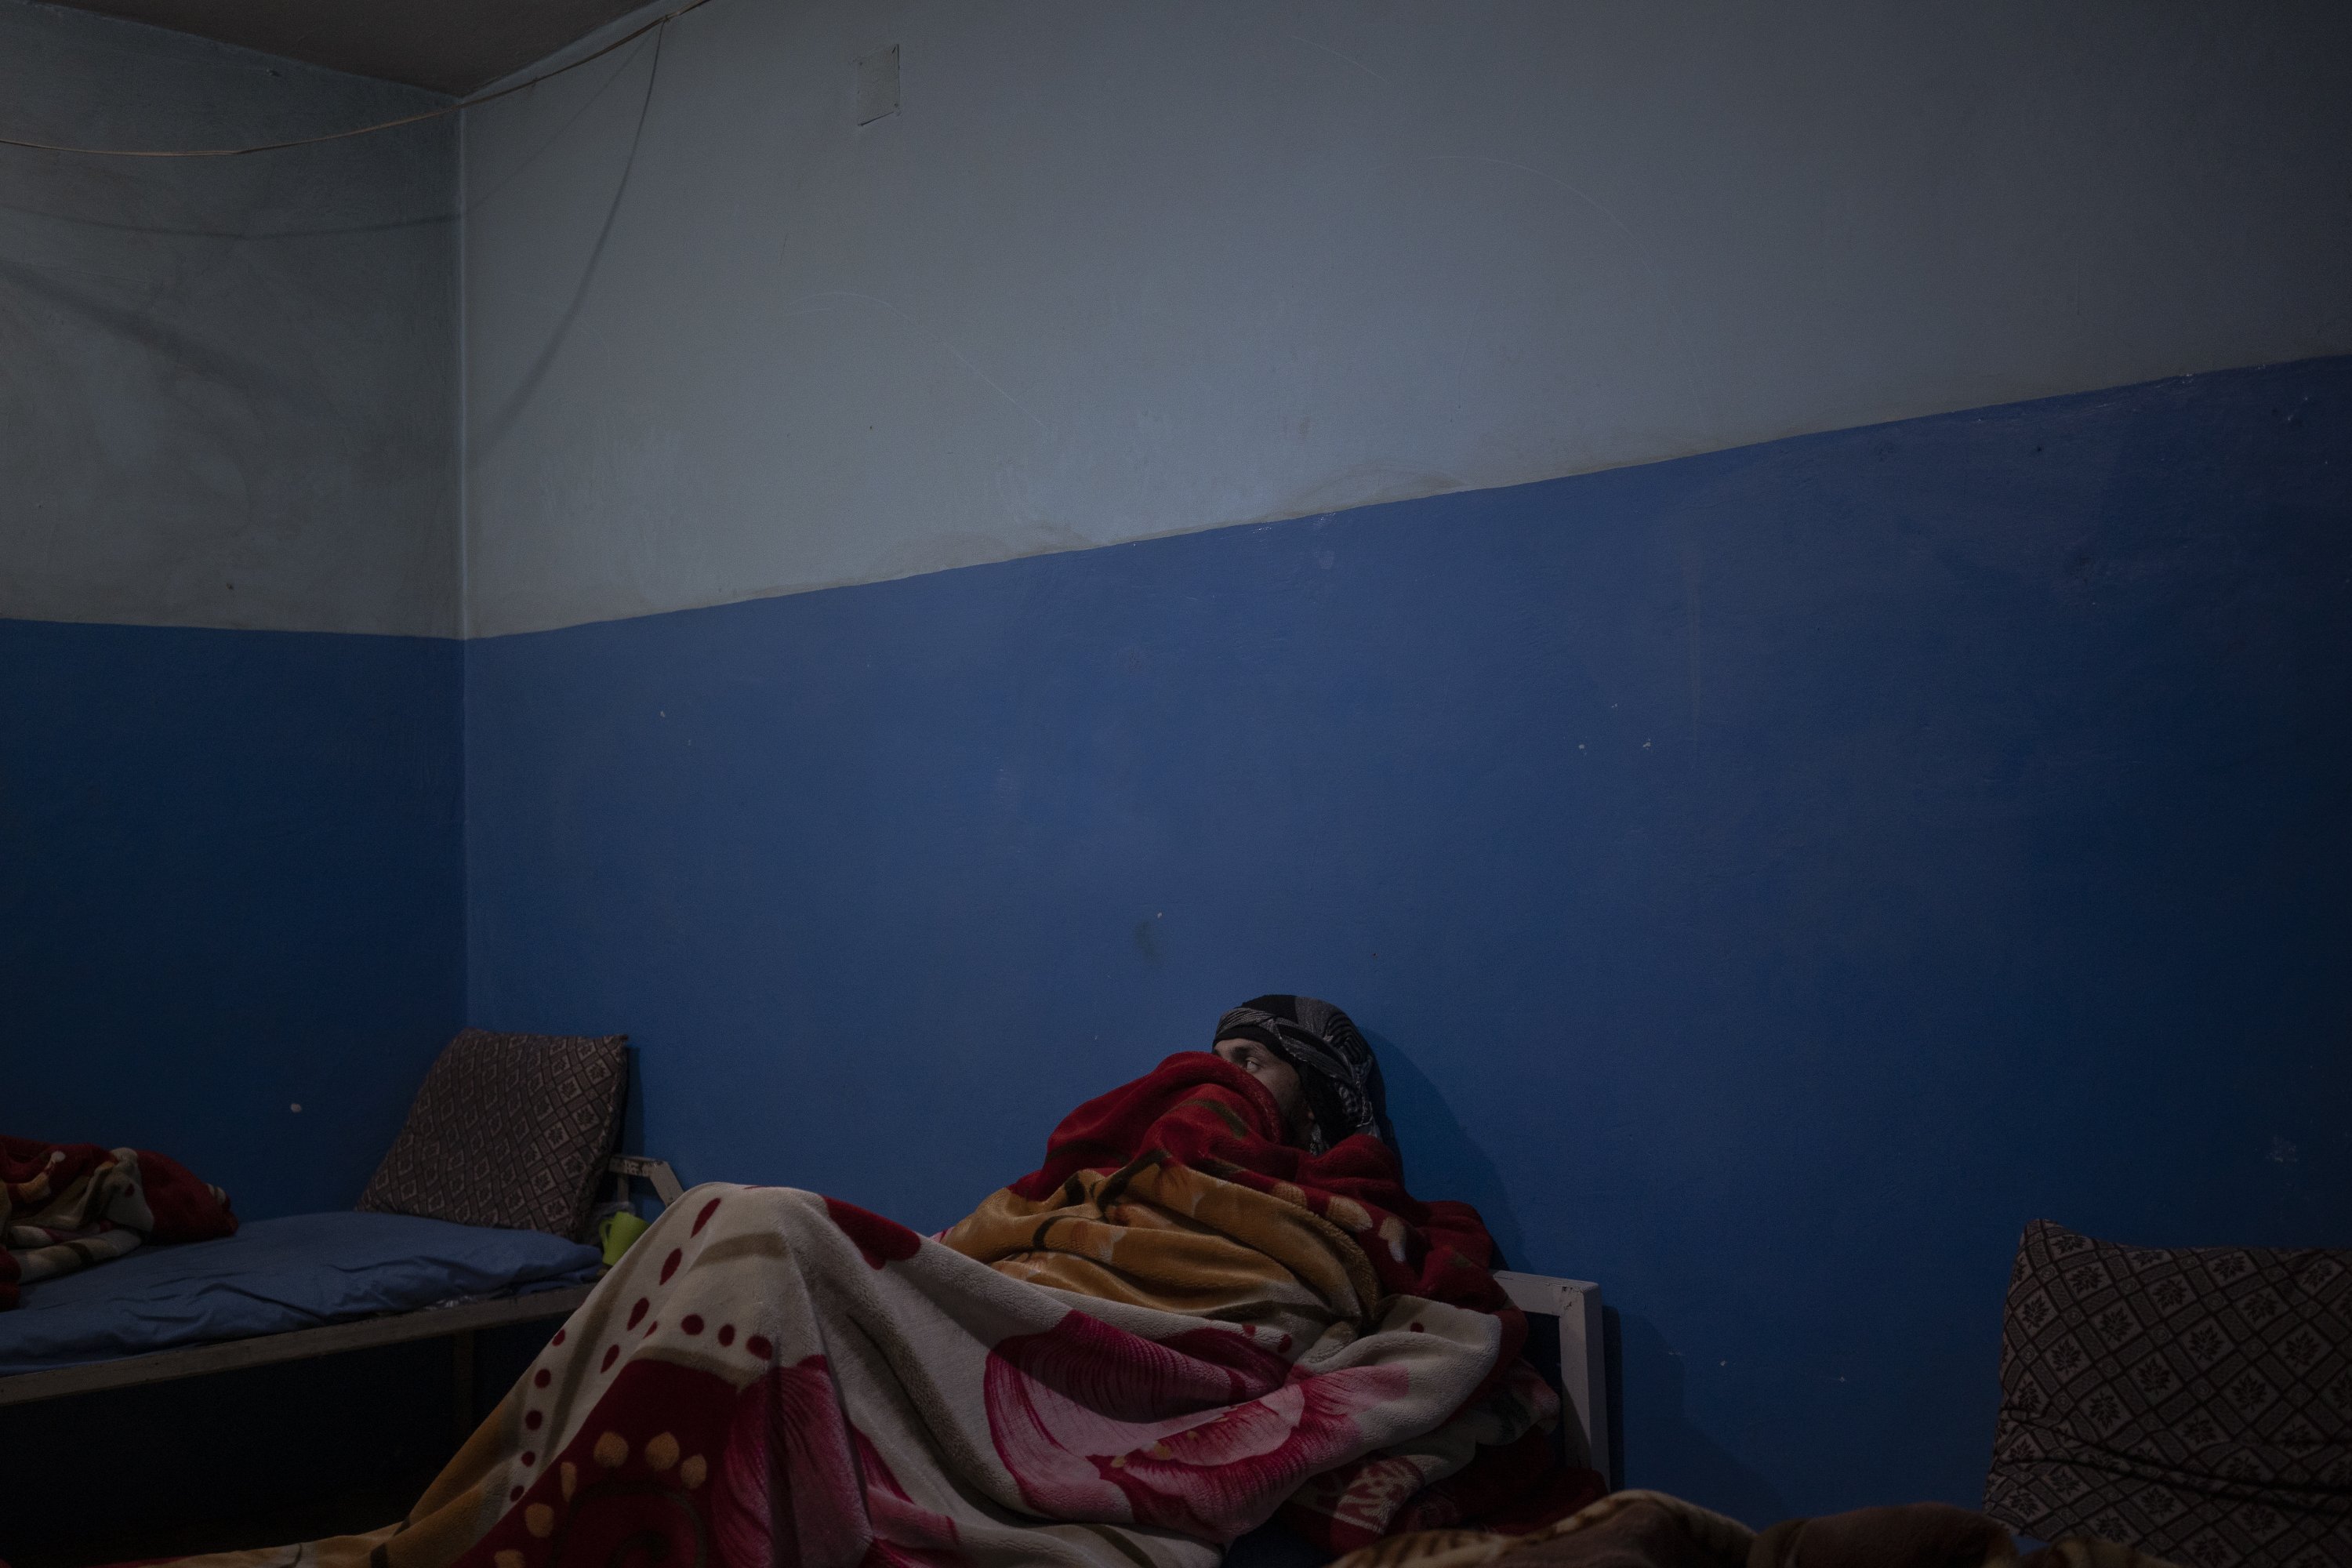 A patient who is being treated for his drug addiction lies in his hospital bed in Mirbacha Kot, Afghanistan, Oct. 24, 2021. (AP Photo)